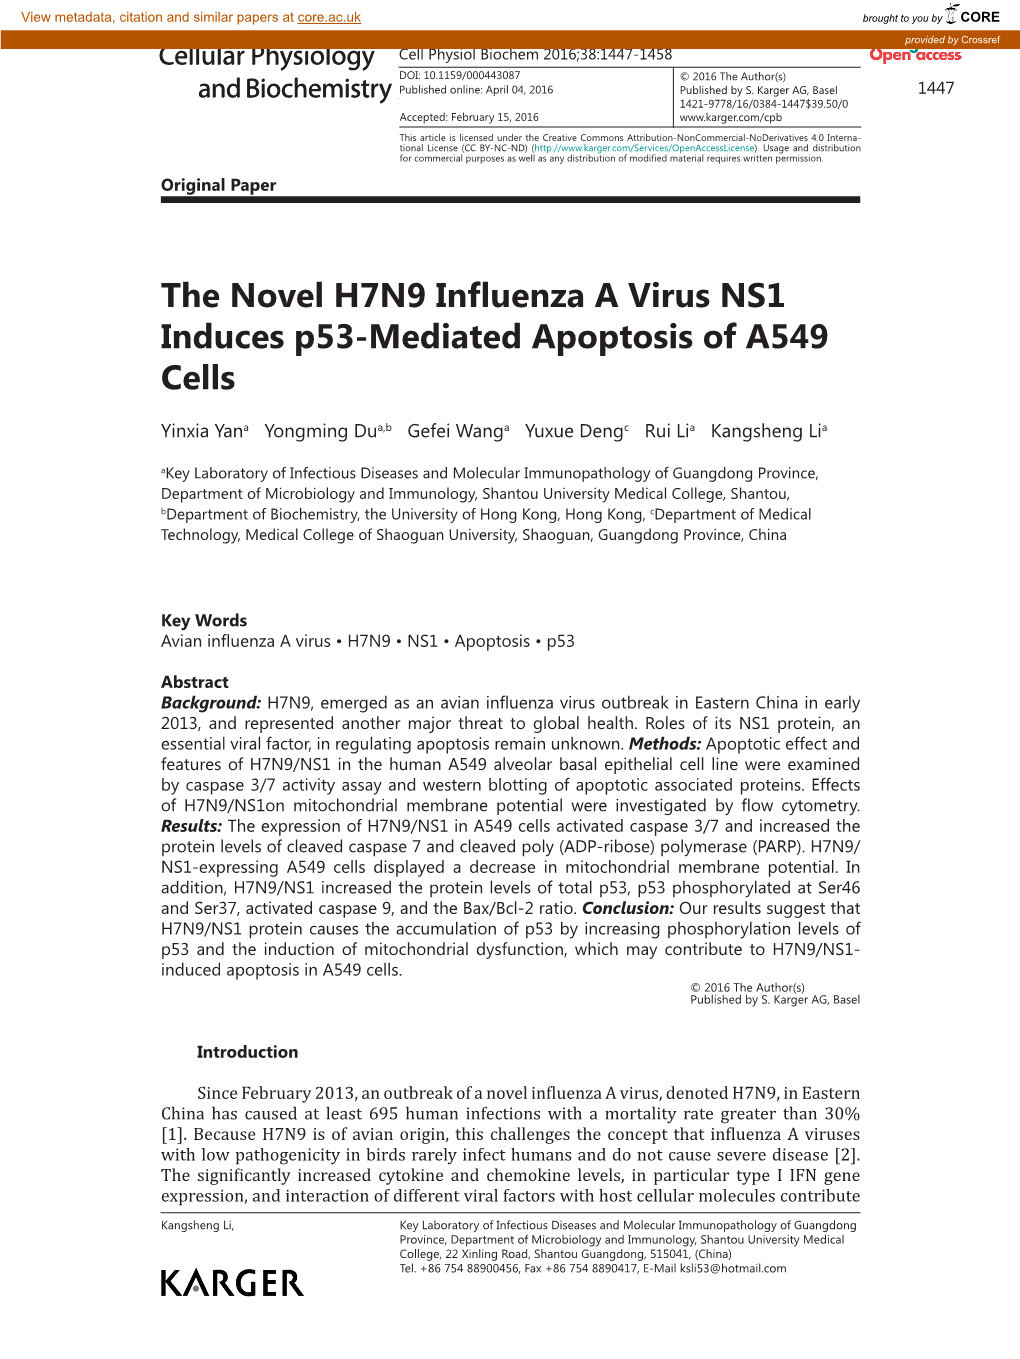 The Novel H7N9 Influenza a Virus NS1 Induces P53-Mediated Apoptosis of A549 Cells